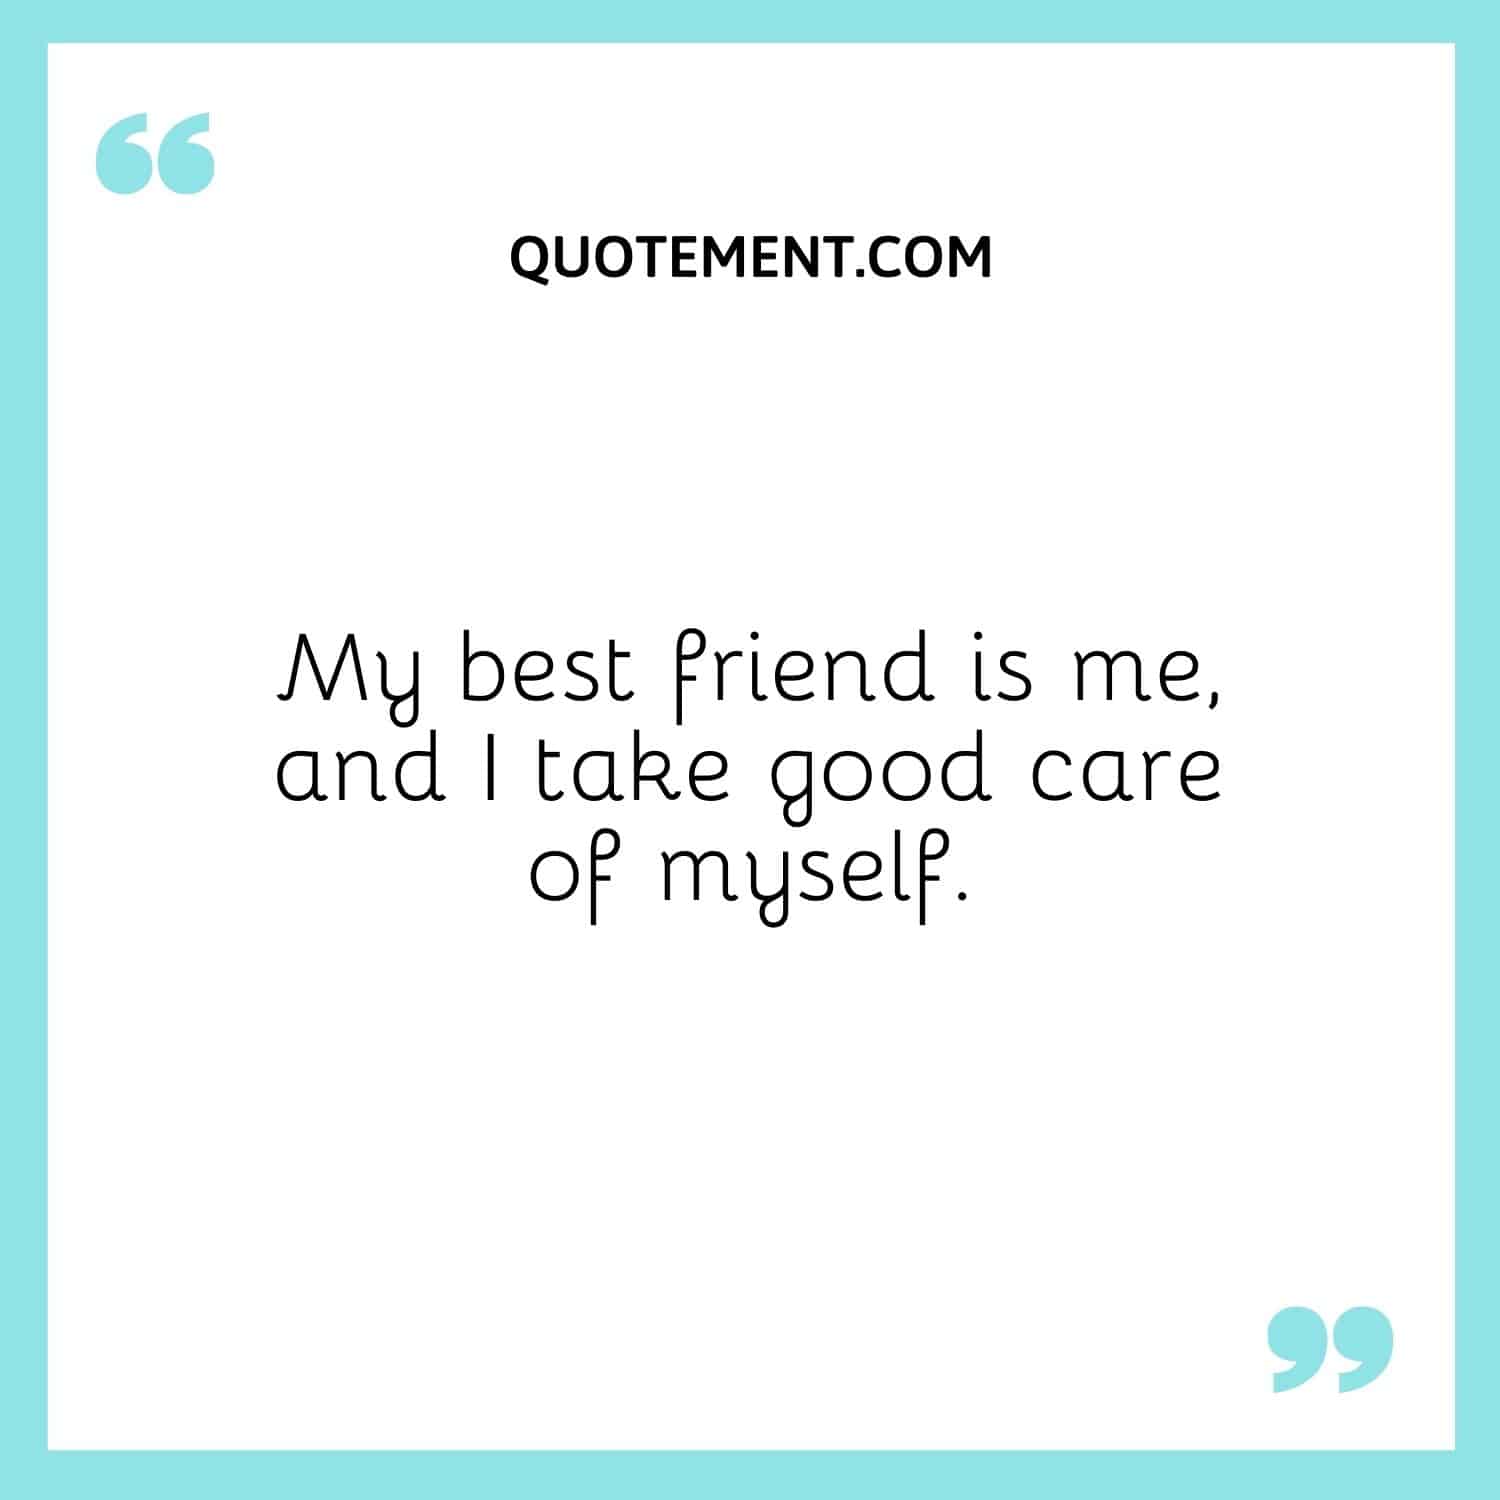 My best friend is me, and I take good care of myself